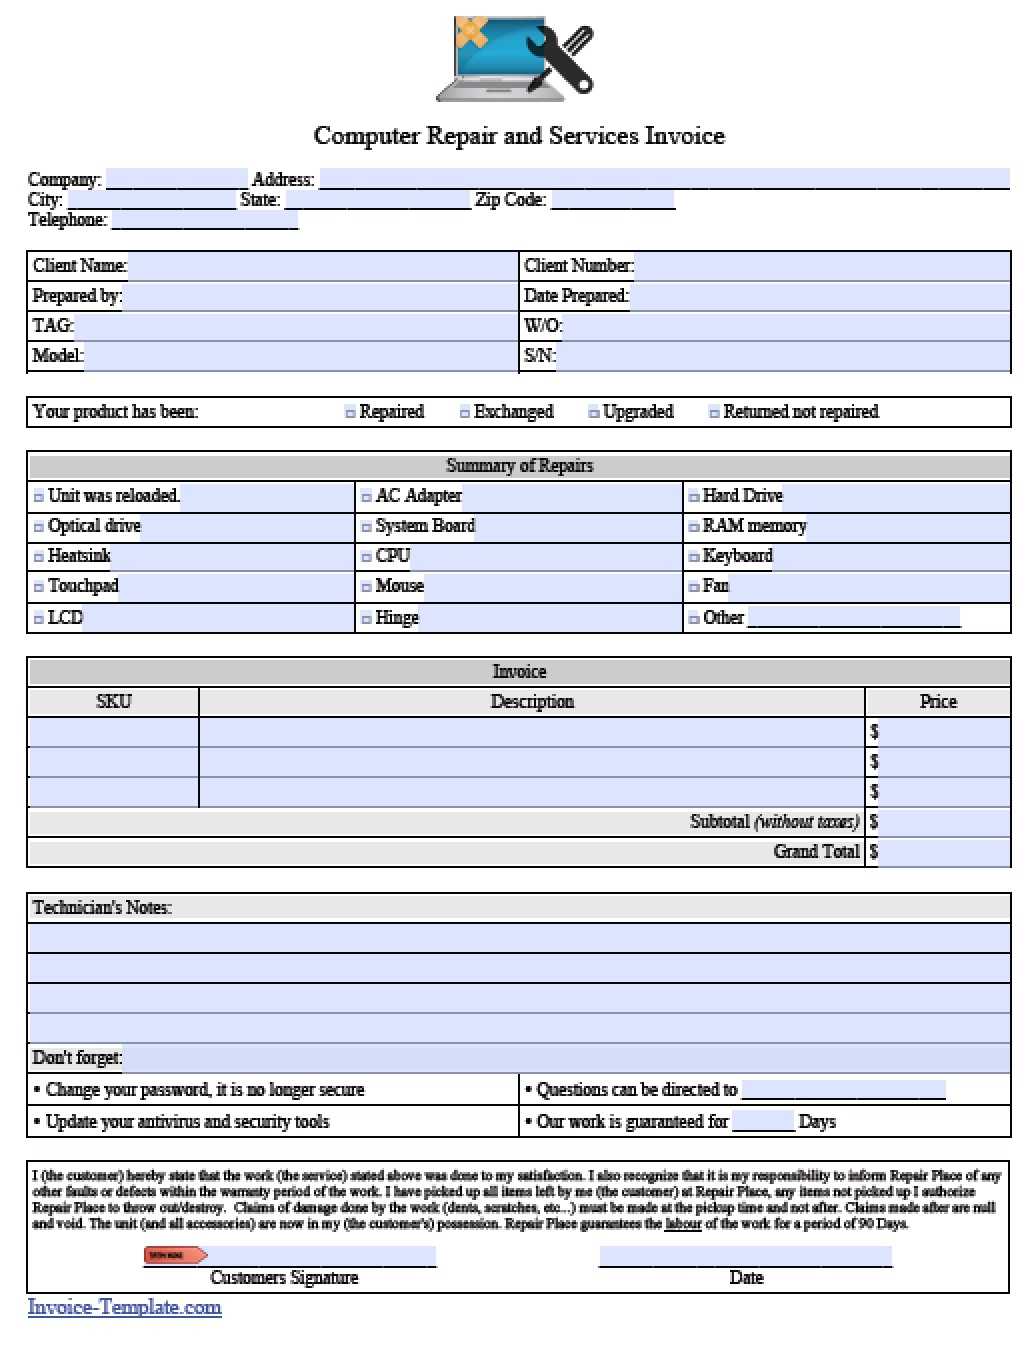 Free Computer Repair Service Invoice Template | Pdf | Word Pertaining To Computer Maintenance Report Template